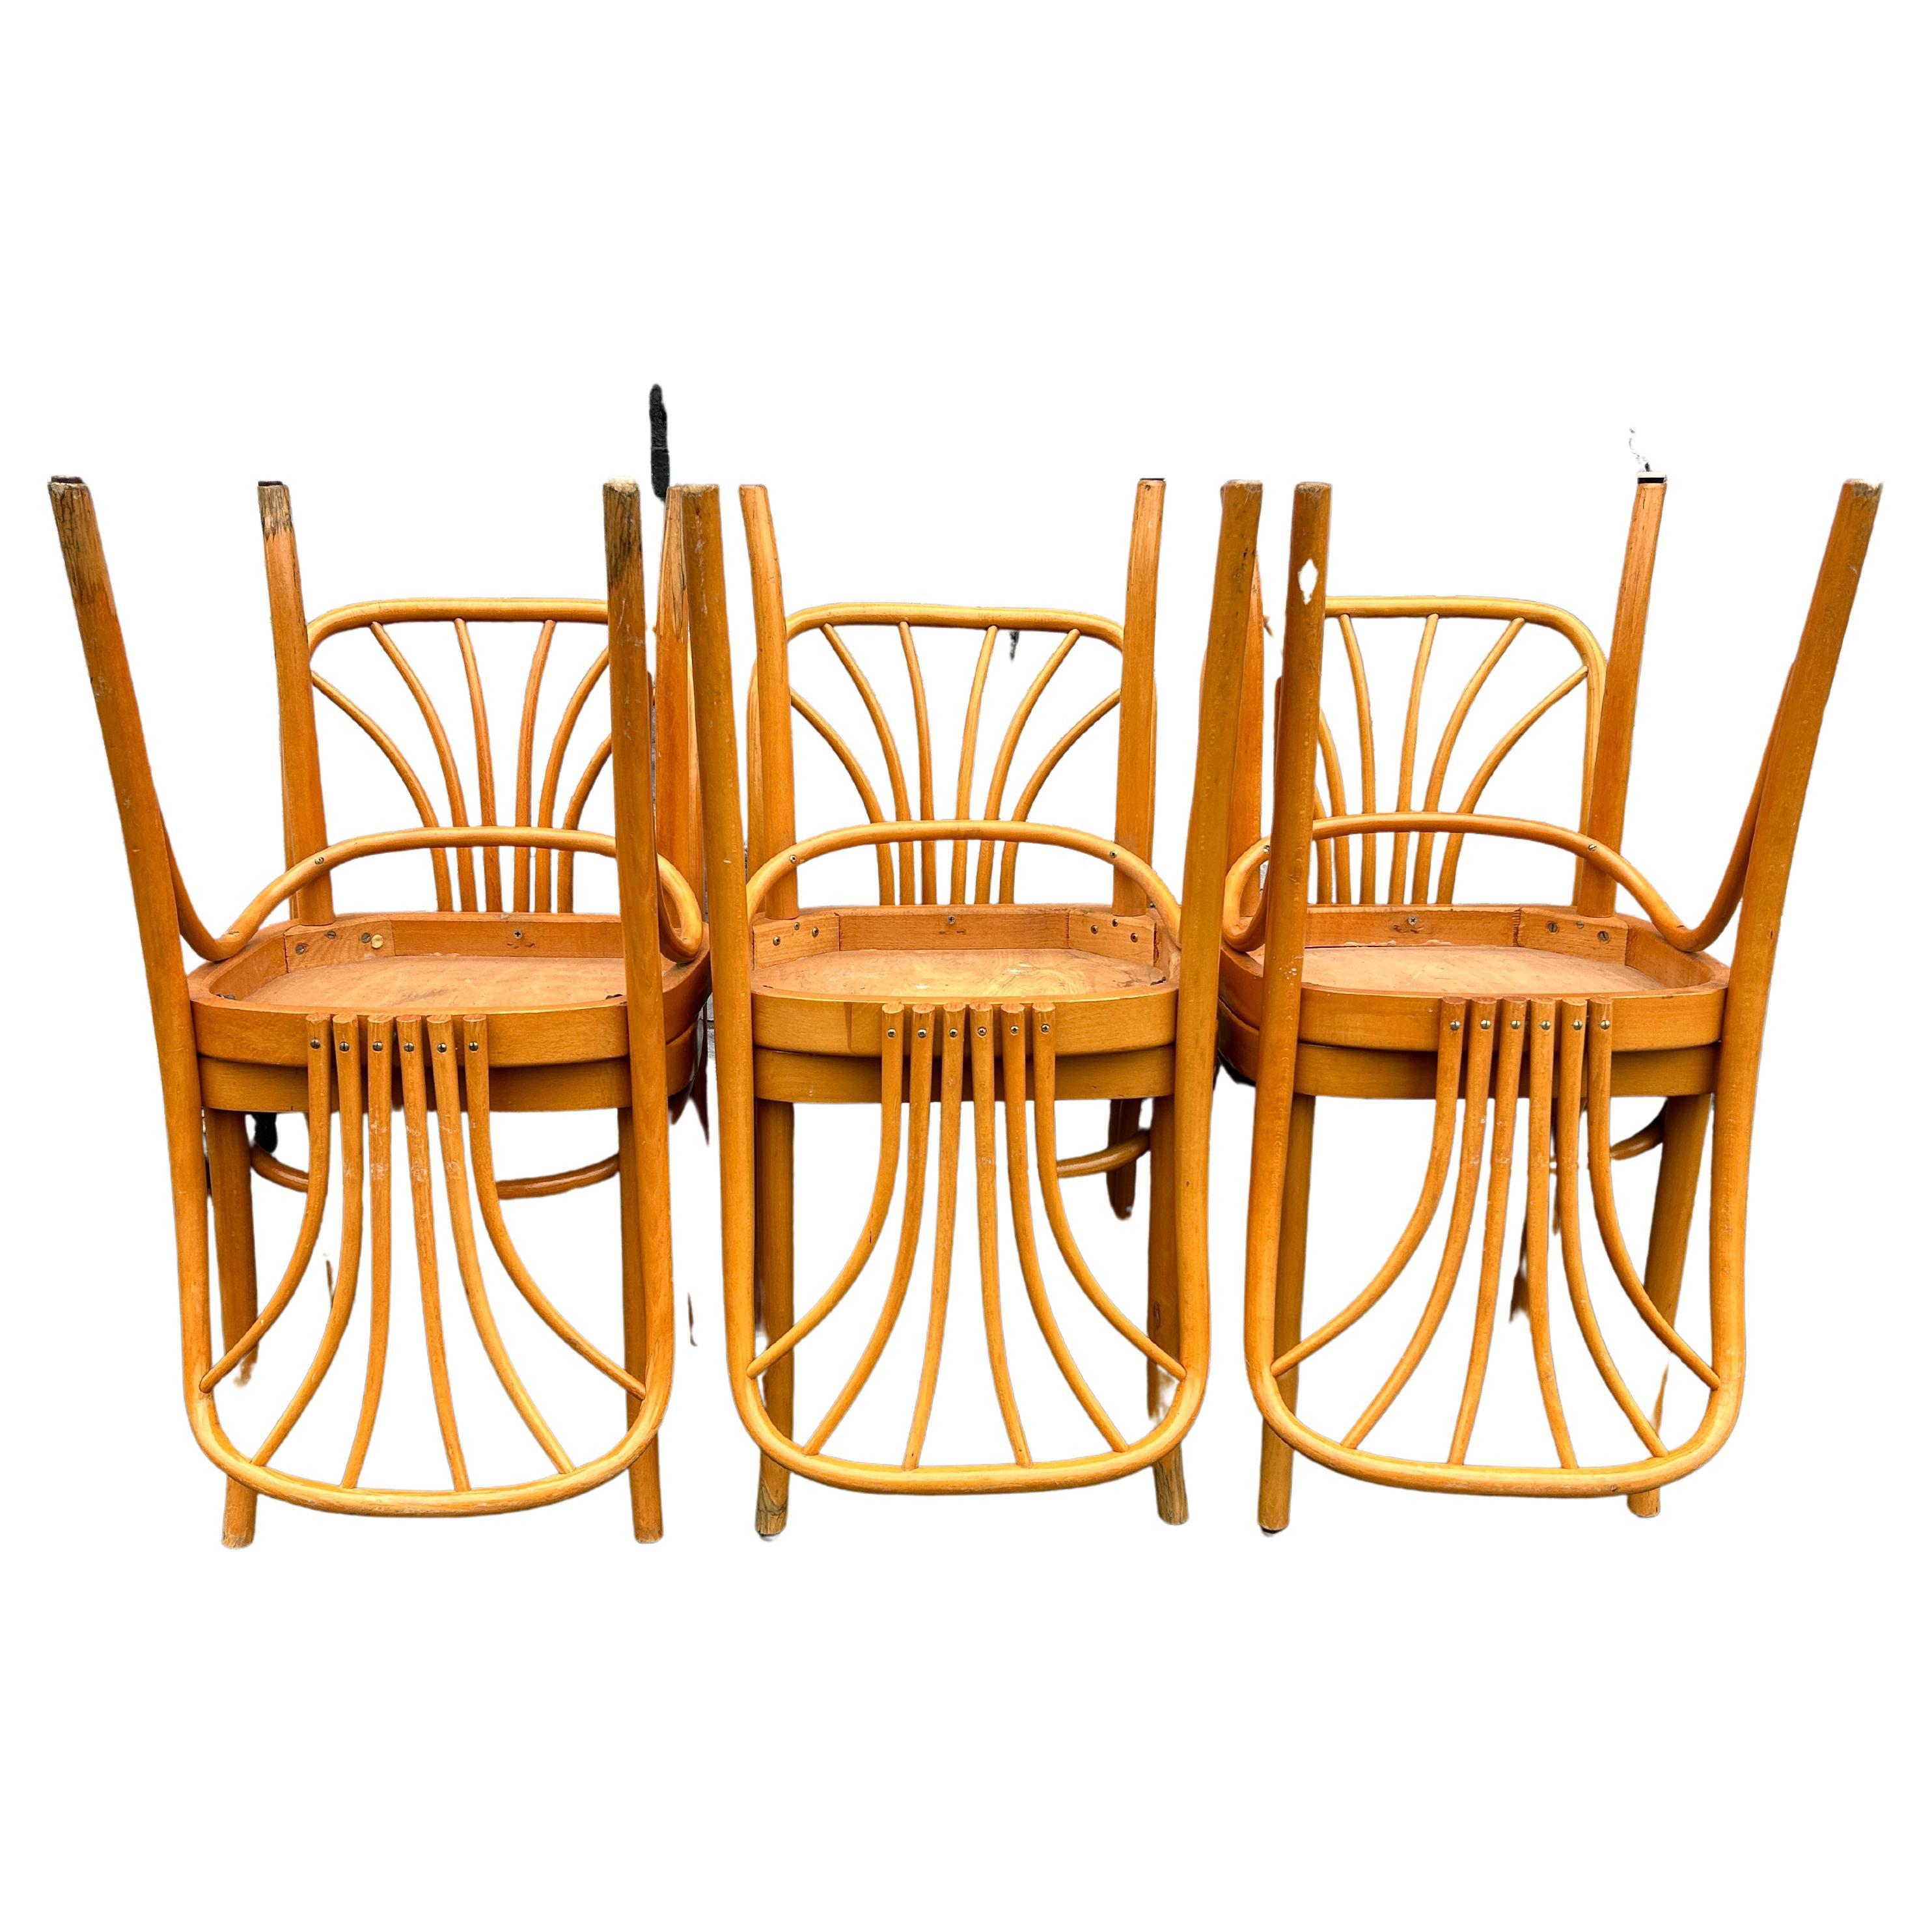 Unique Set of 6 Mid-Century Bentwood Dining Chairs Thonet Josef Hoffmann In Good Condition For Sale In BROOKLYN, NY